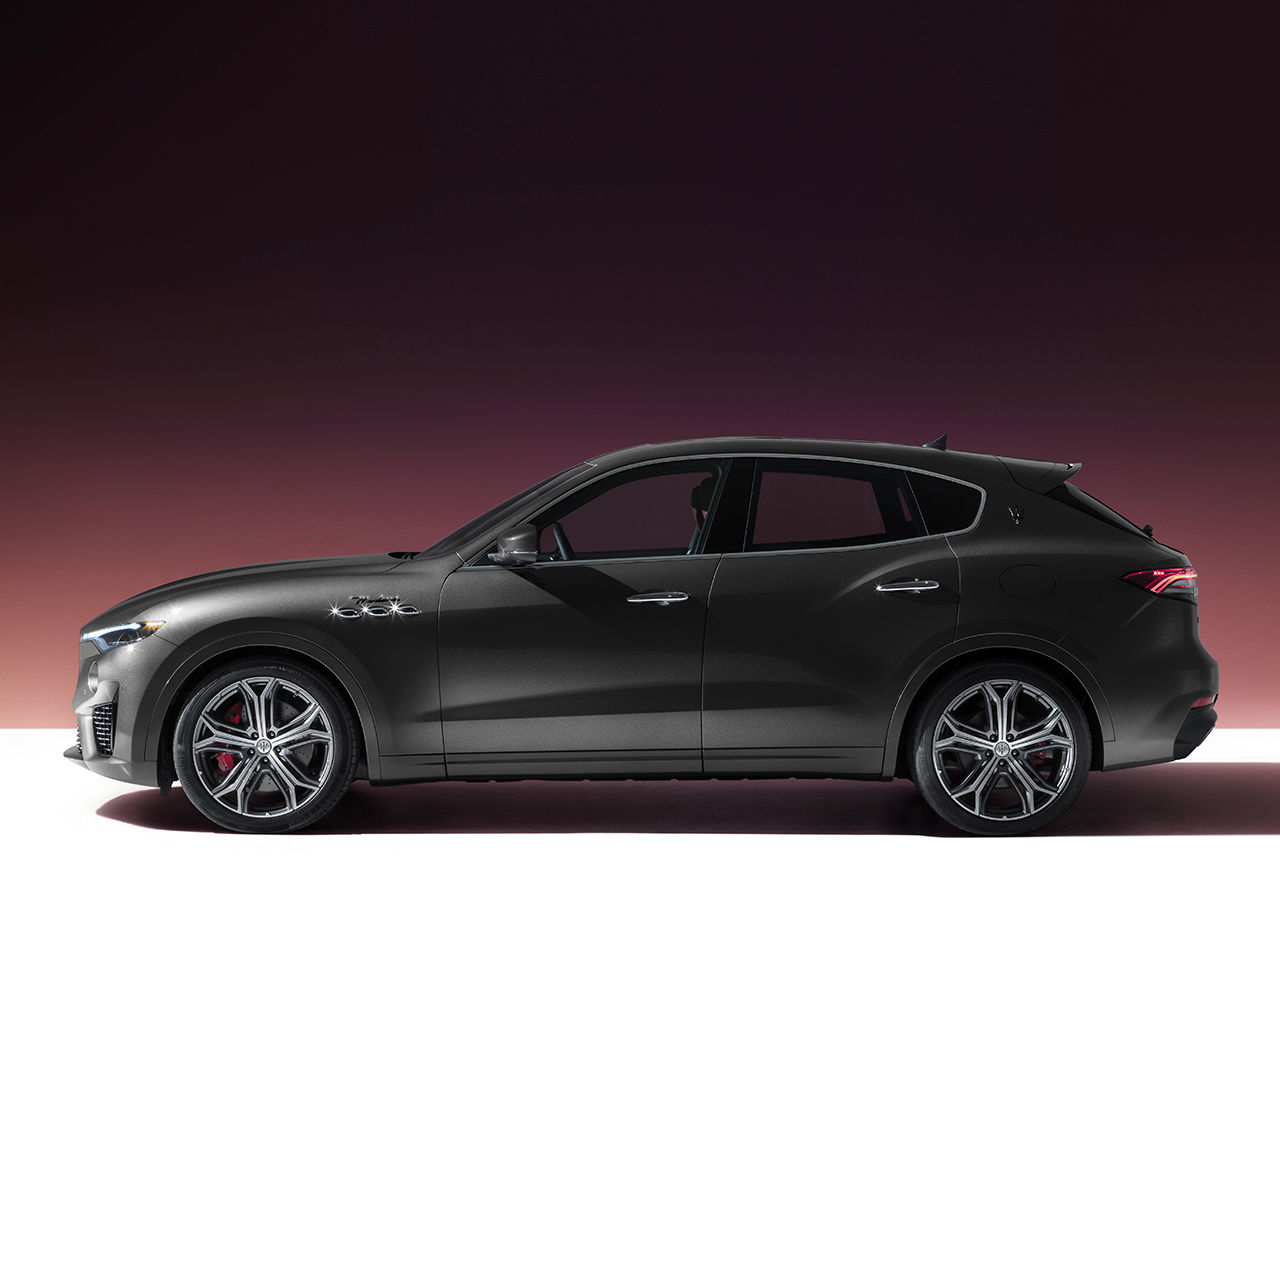 Sideview of Maserati Levante